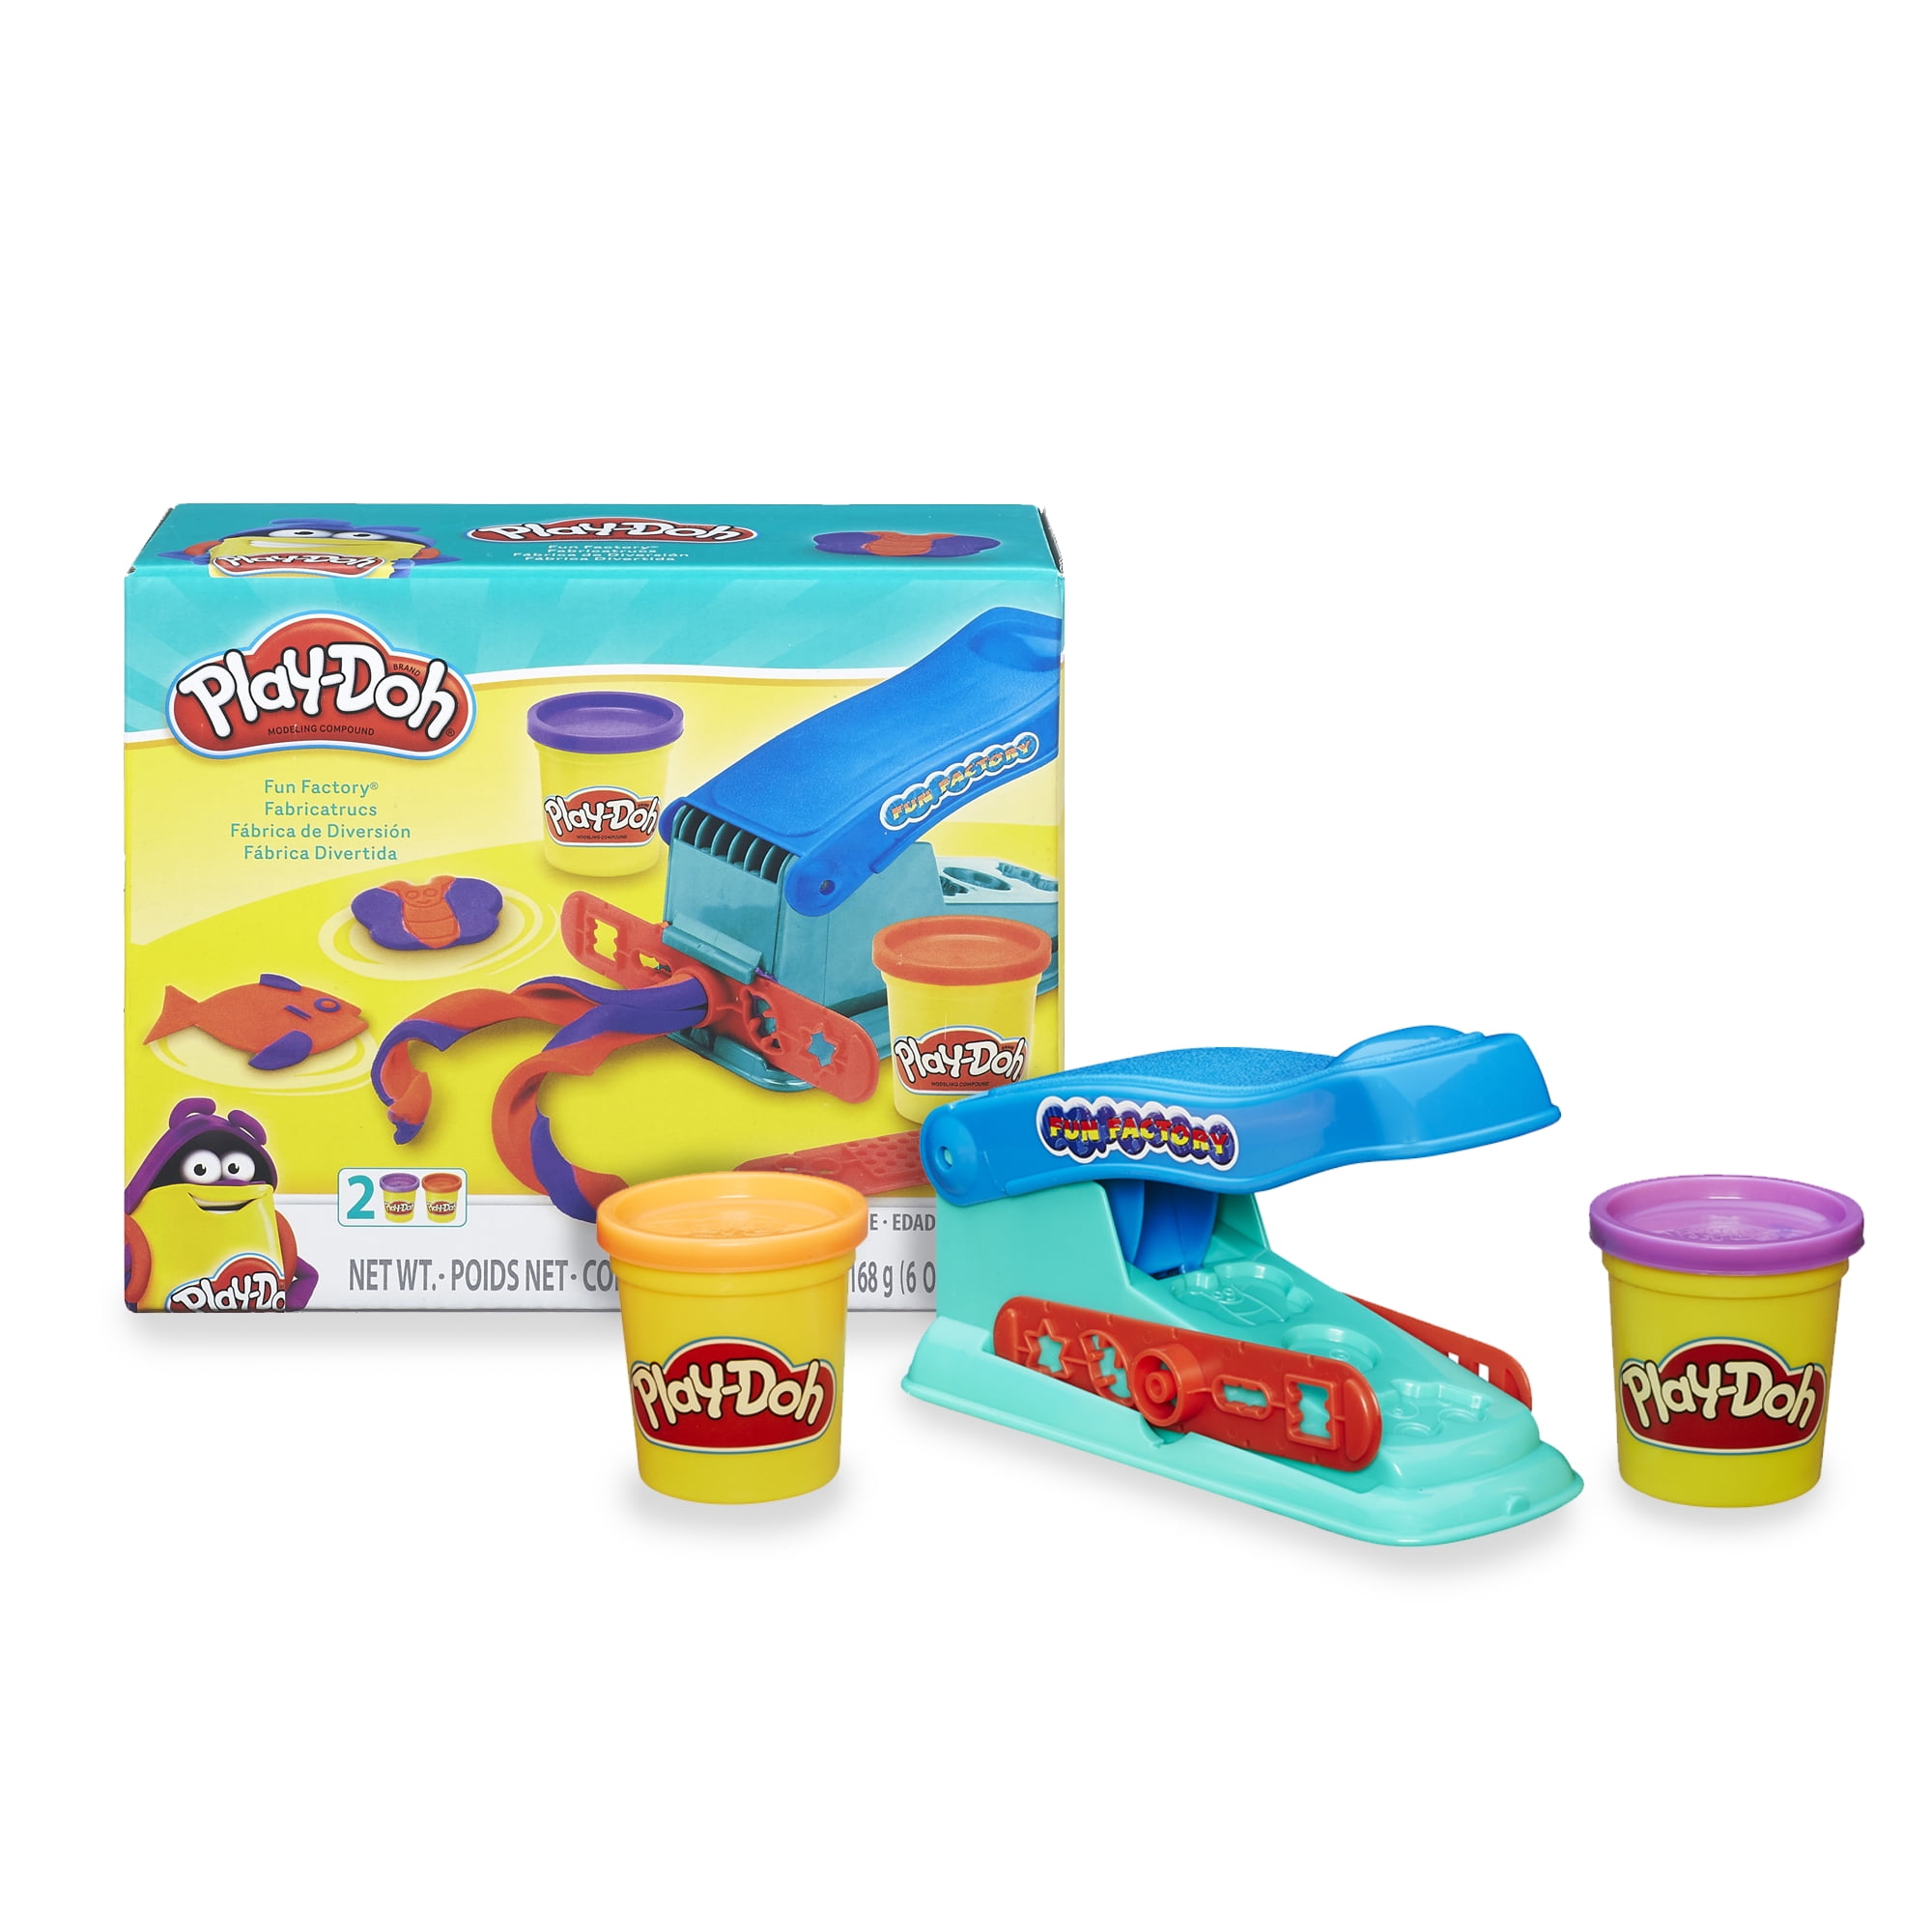 Play-Doh Stamp 'n Shape Toolkit 30 Tools Outplayed Utensilios for sale online 